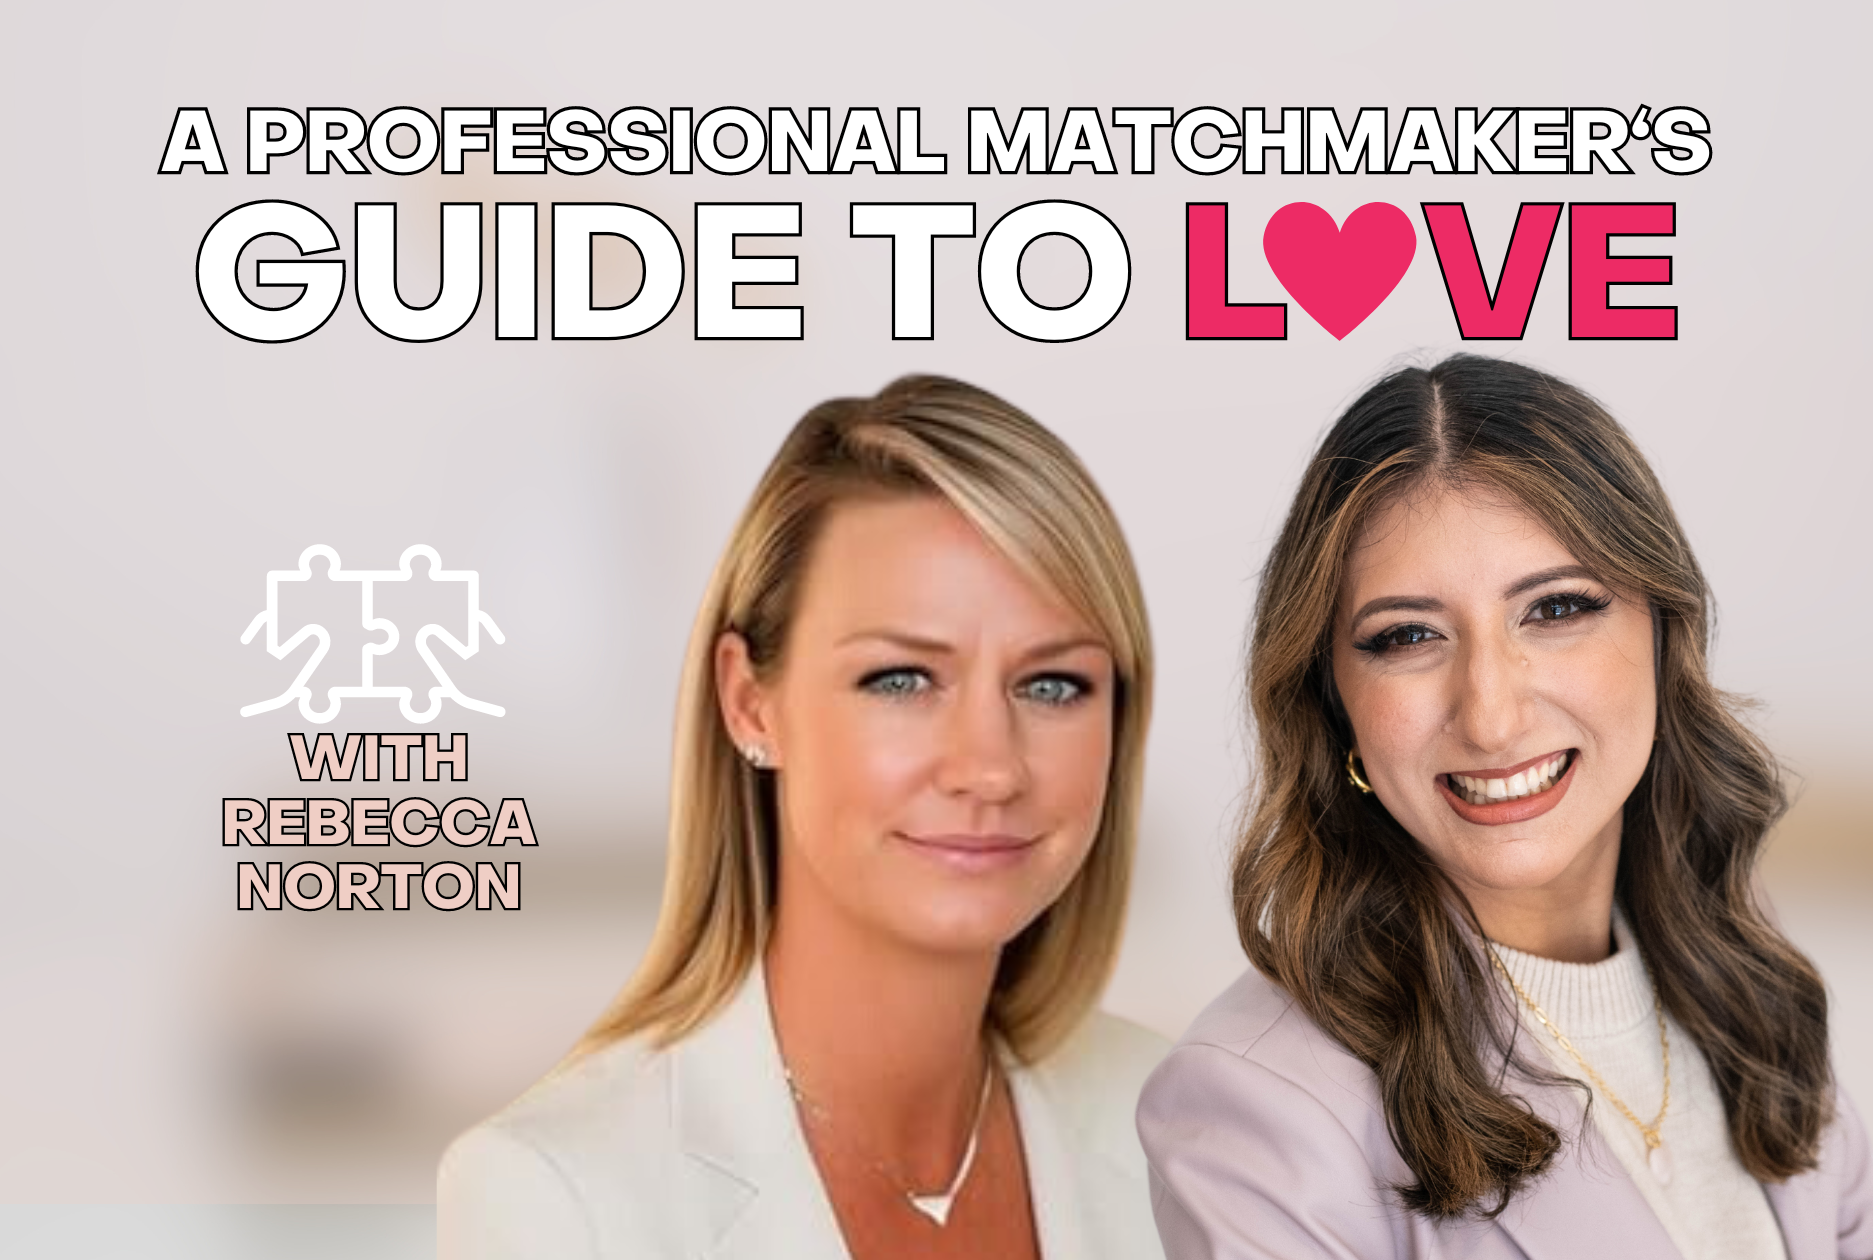 A Professional matchmaker‘s guide to love. With Rebecca Norton